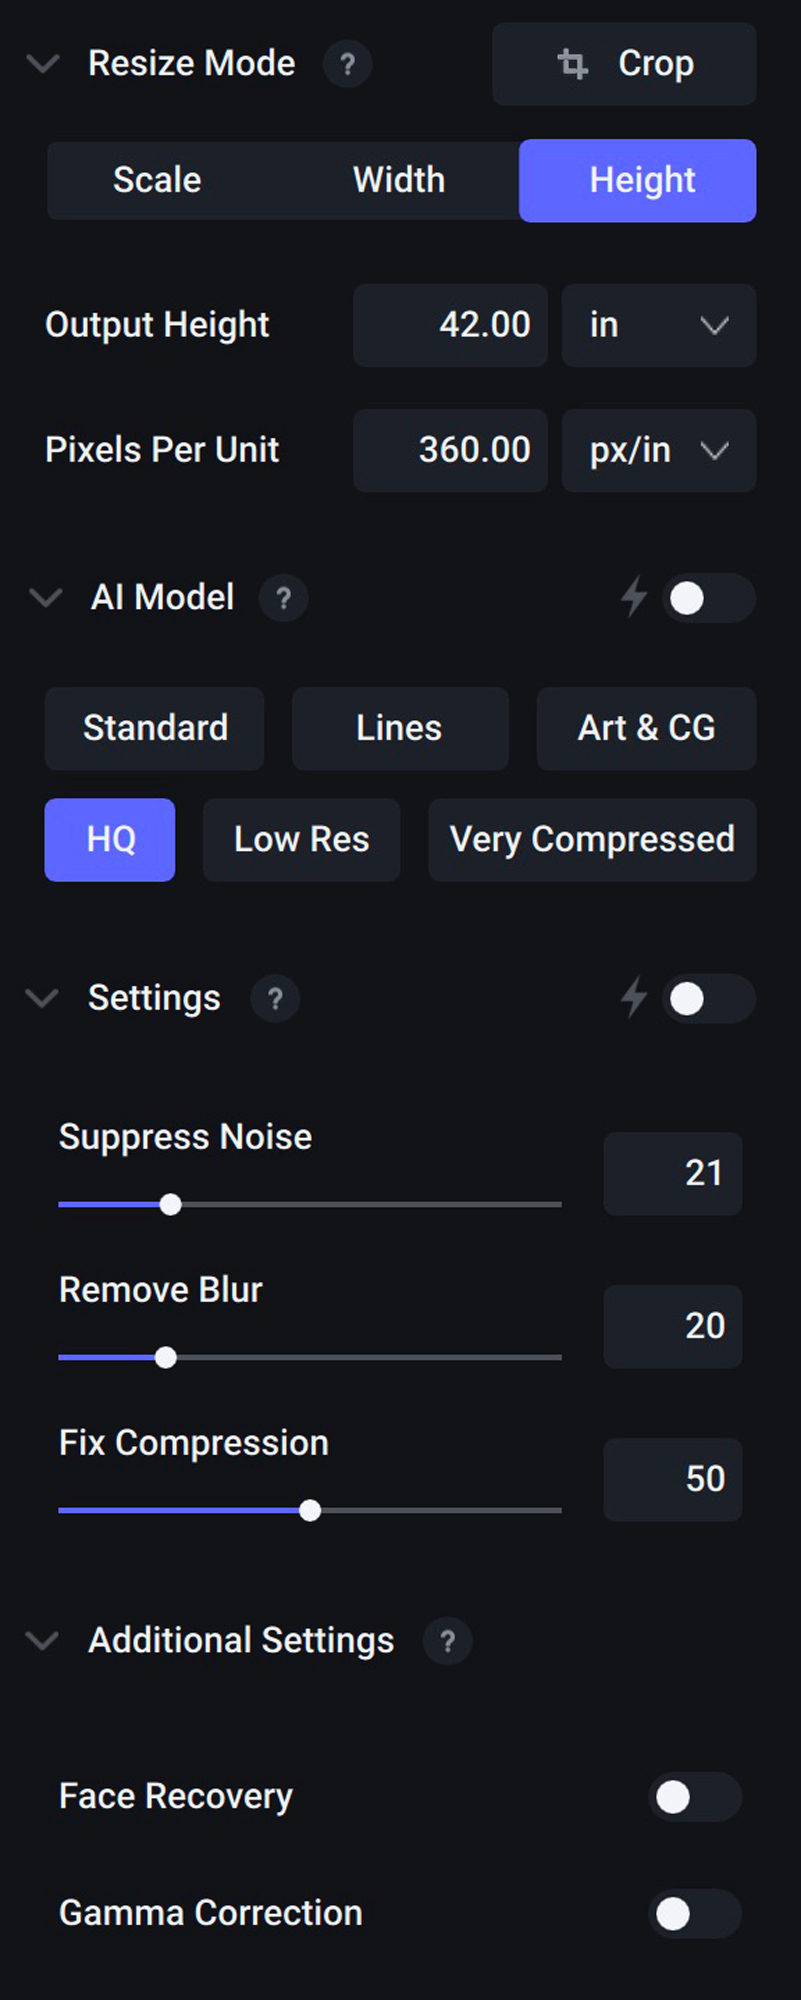 The final settings used